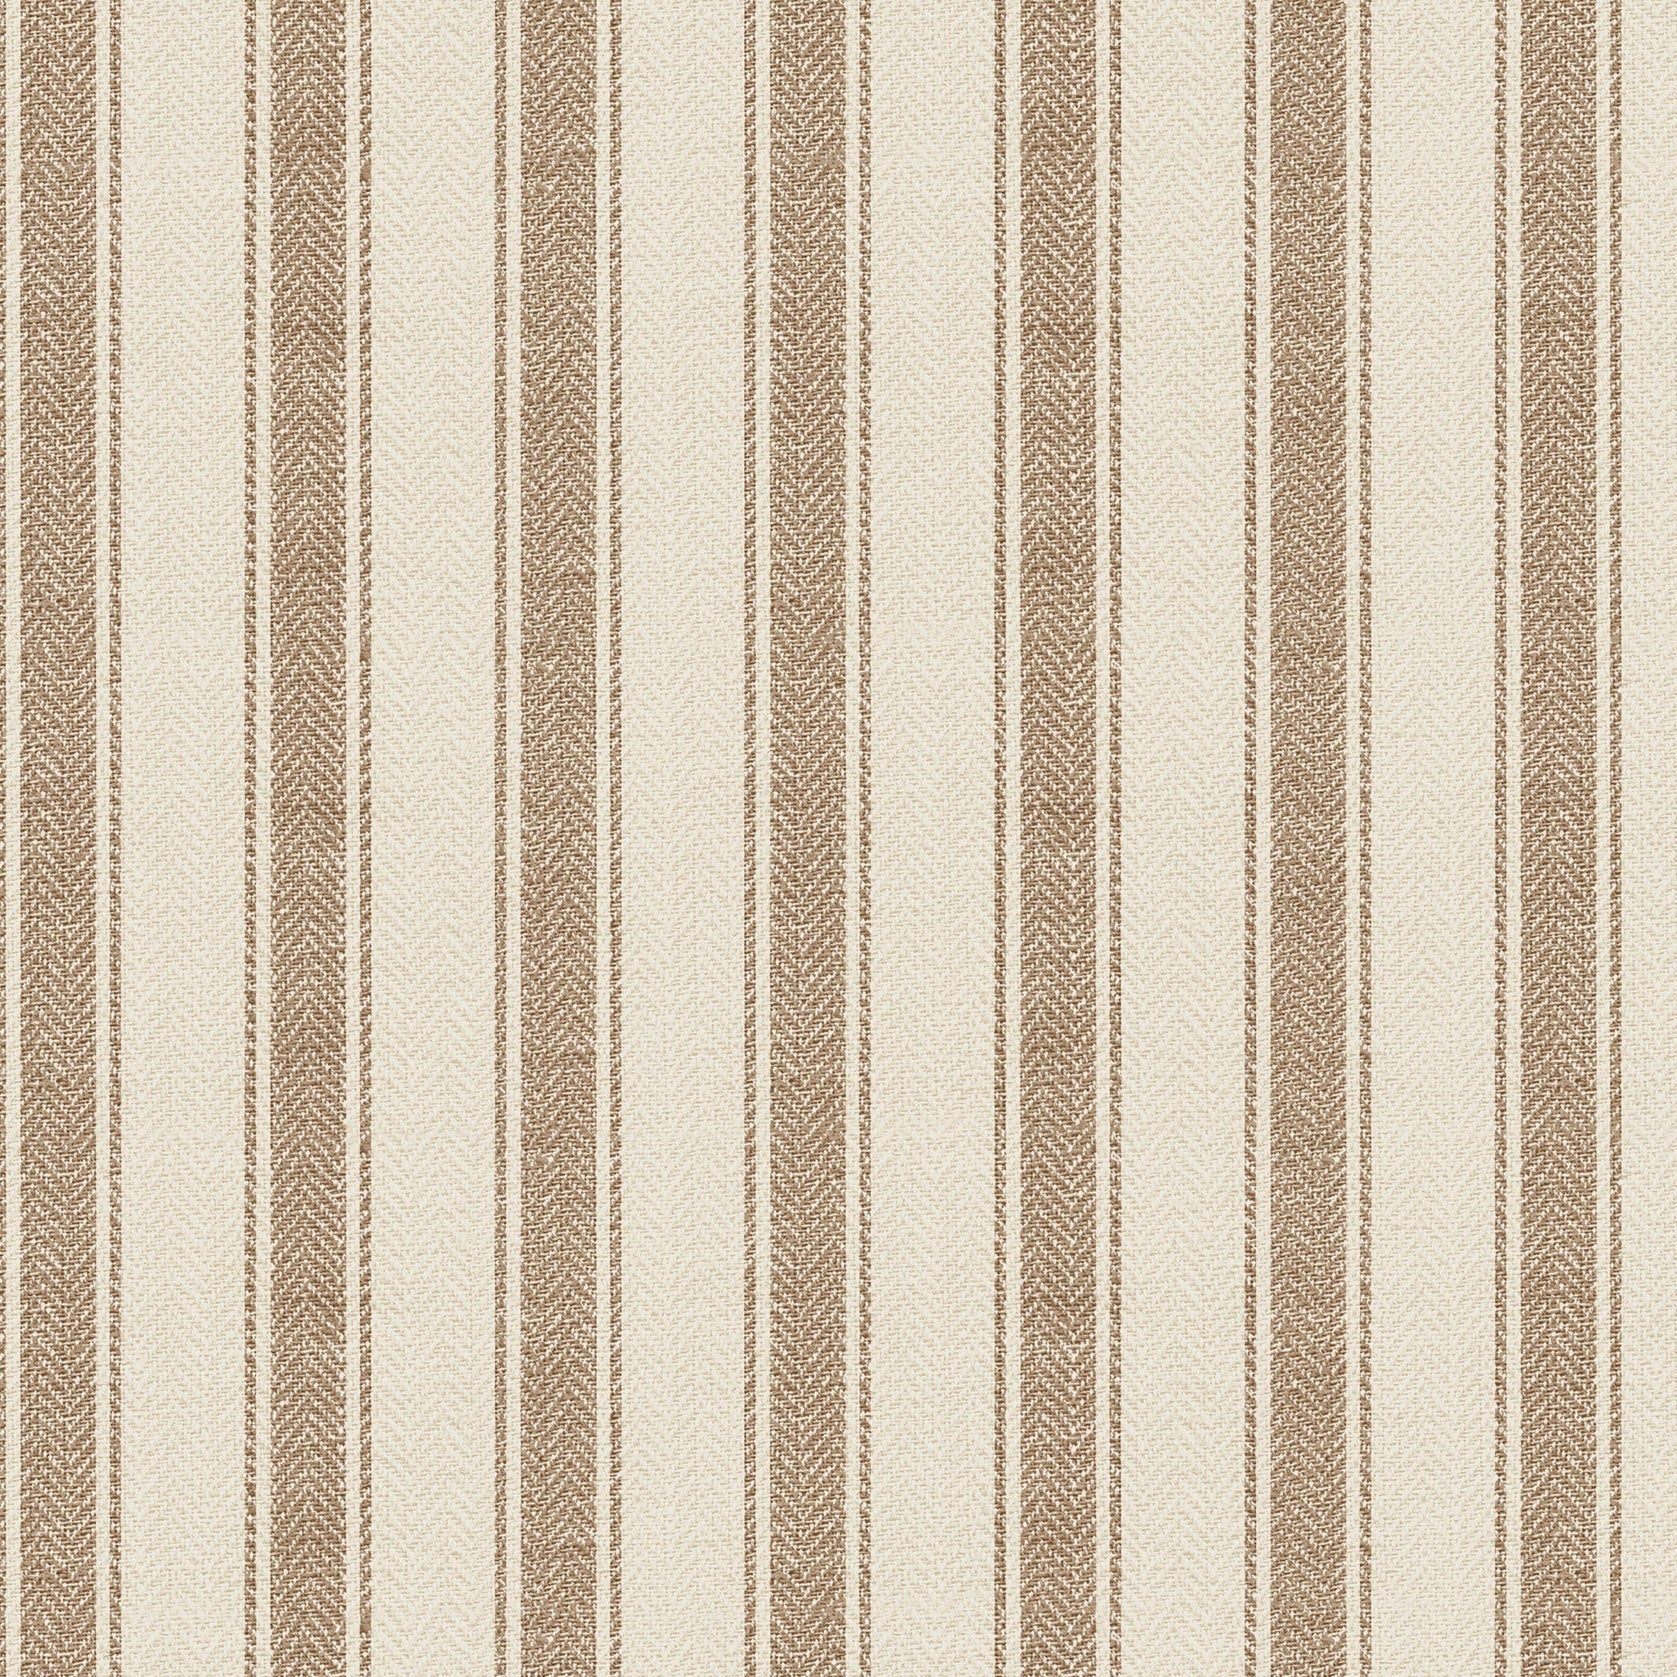 A sample of Striped Fabric Wallpaper with neatly arranged vertical stripes in alternating shades of tan and cream, exuding a classic elegance and simplicity that can effortlessly elevate any room's decor